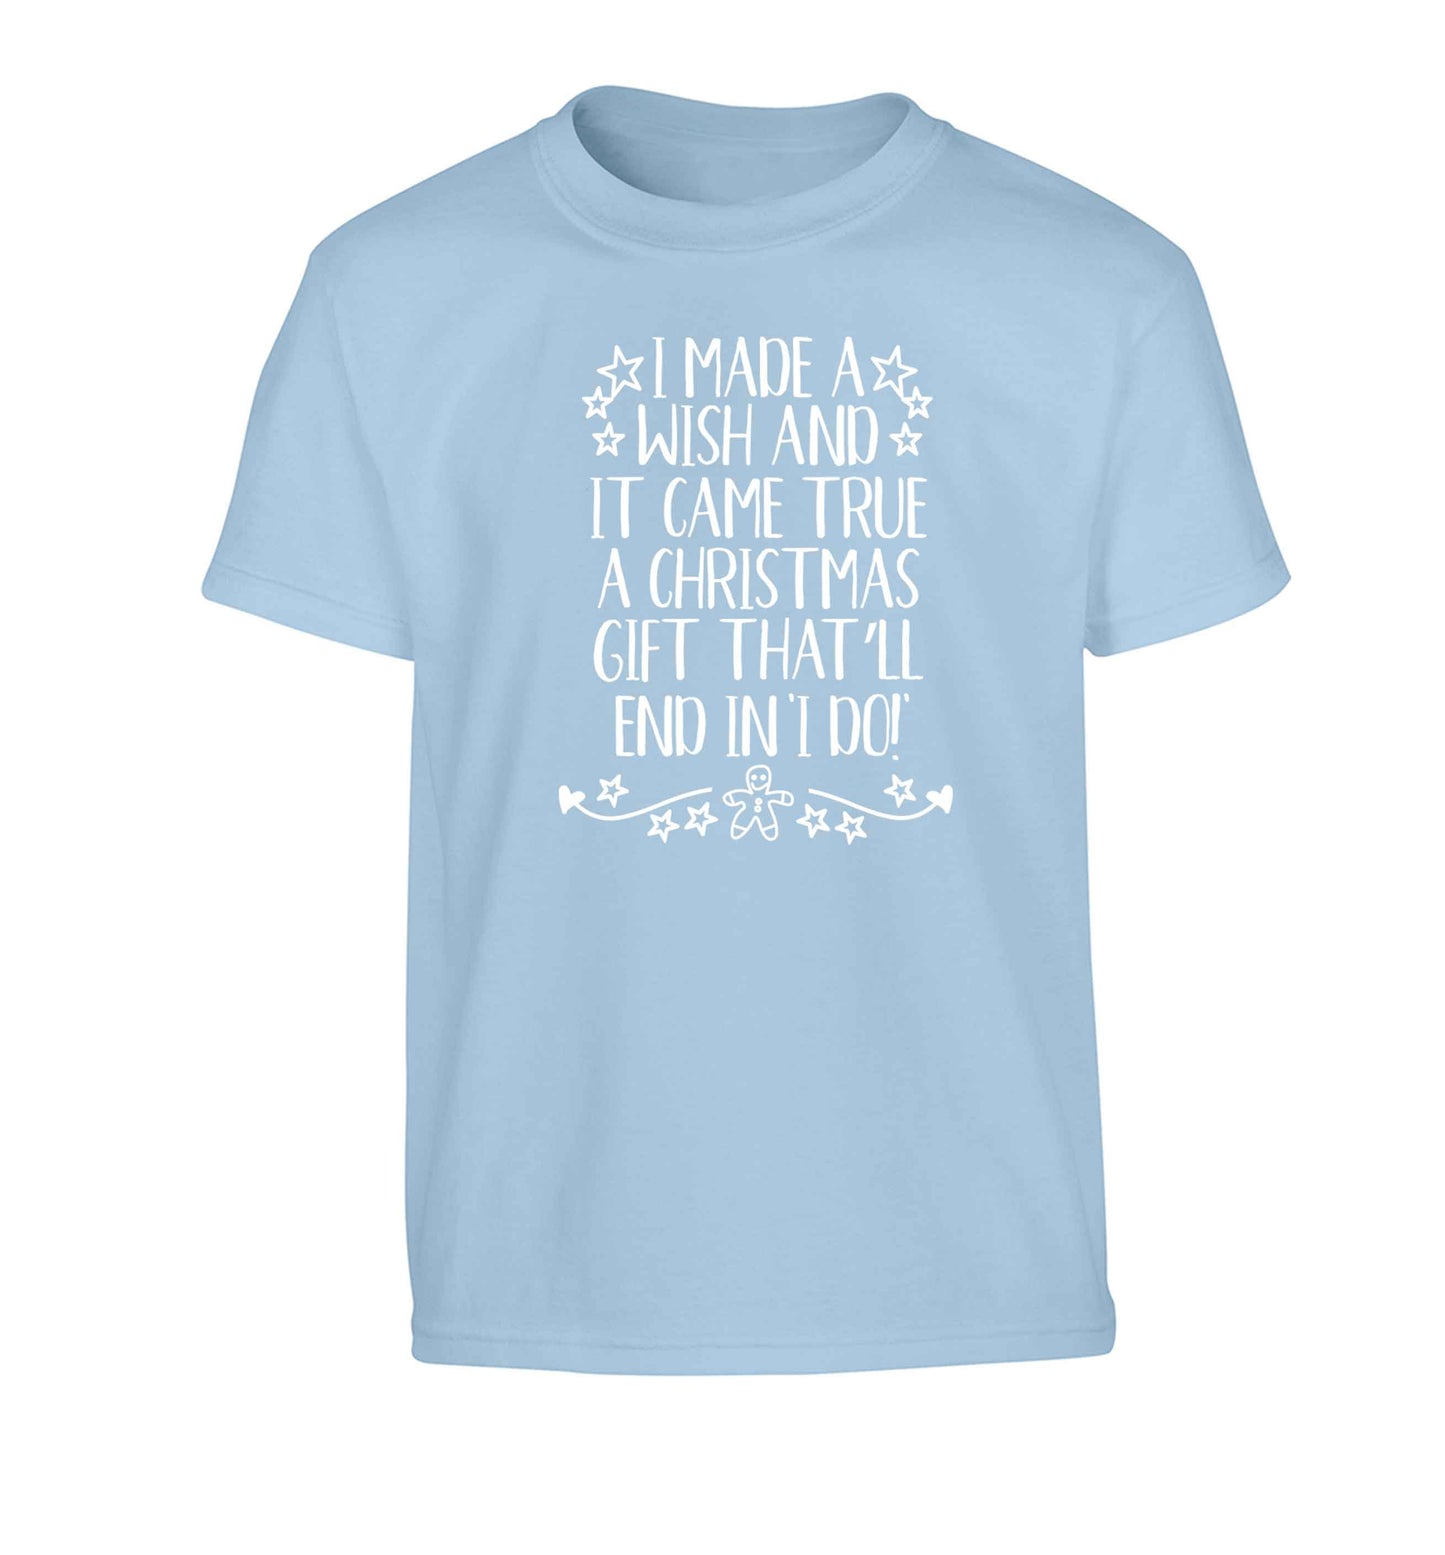 I made a wish and it came true a Christmas gift that'll end in 'I do' Children's light blue Tshirt 12-13 Years